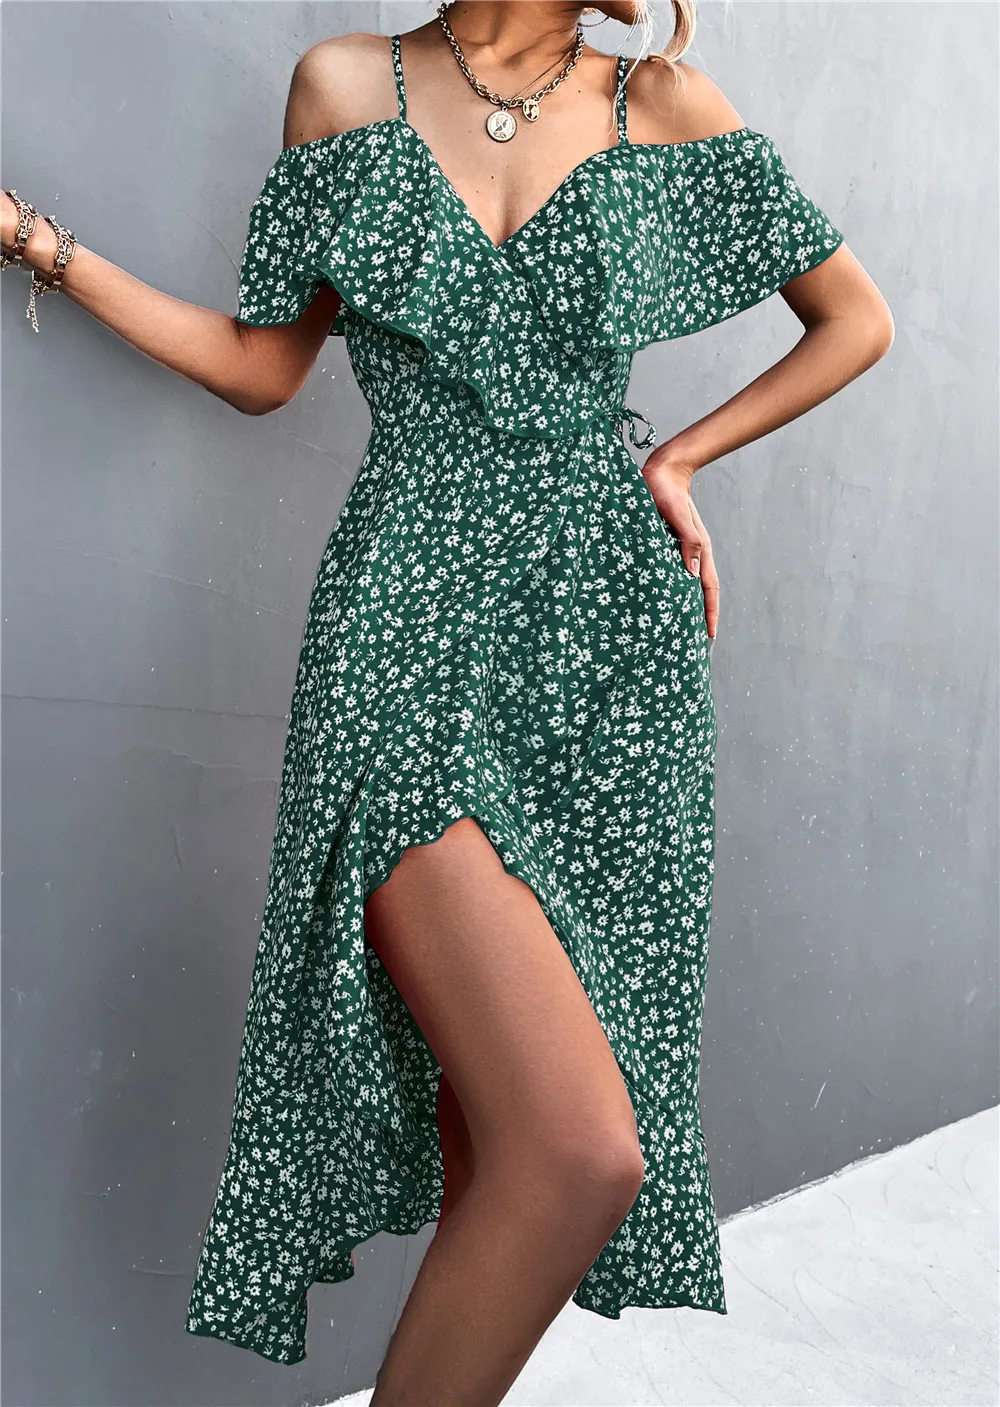 

Chic Floral Pint Dress Summer High Split Sexy V-neck Spaghetti Strap Dress 2022 Fashion Flounced Ladies Holiday Party Sundress